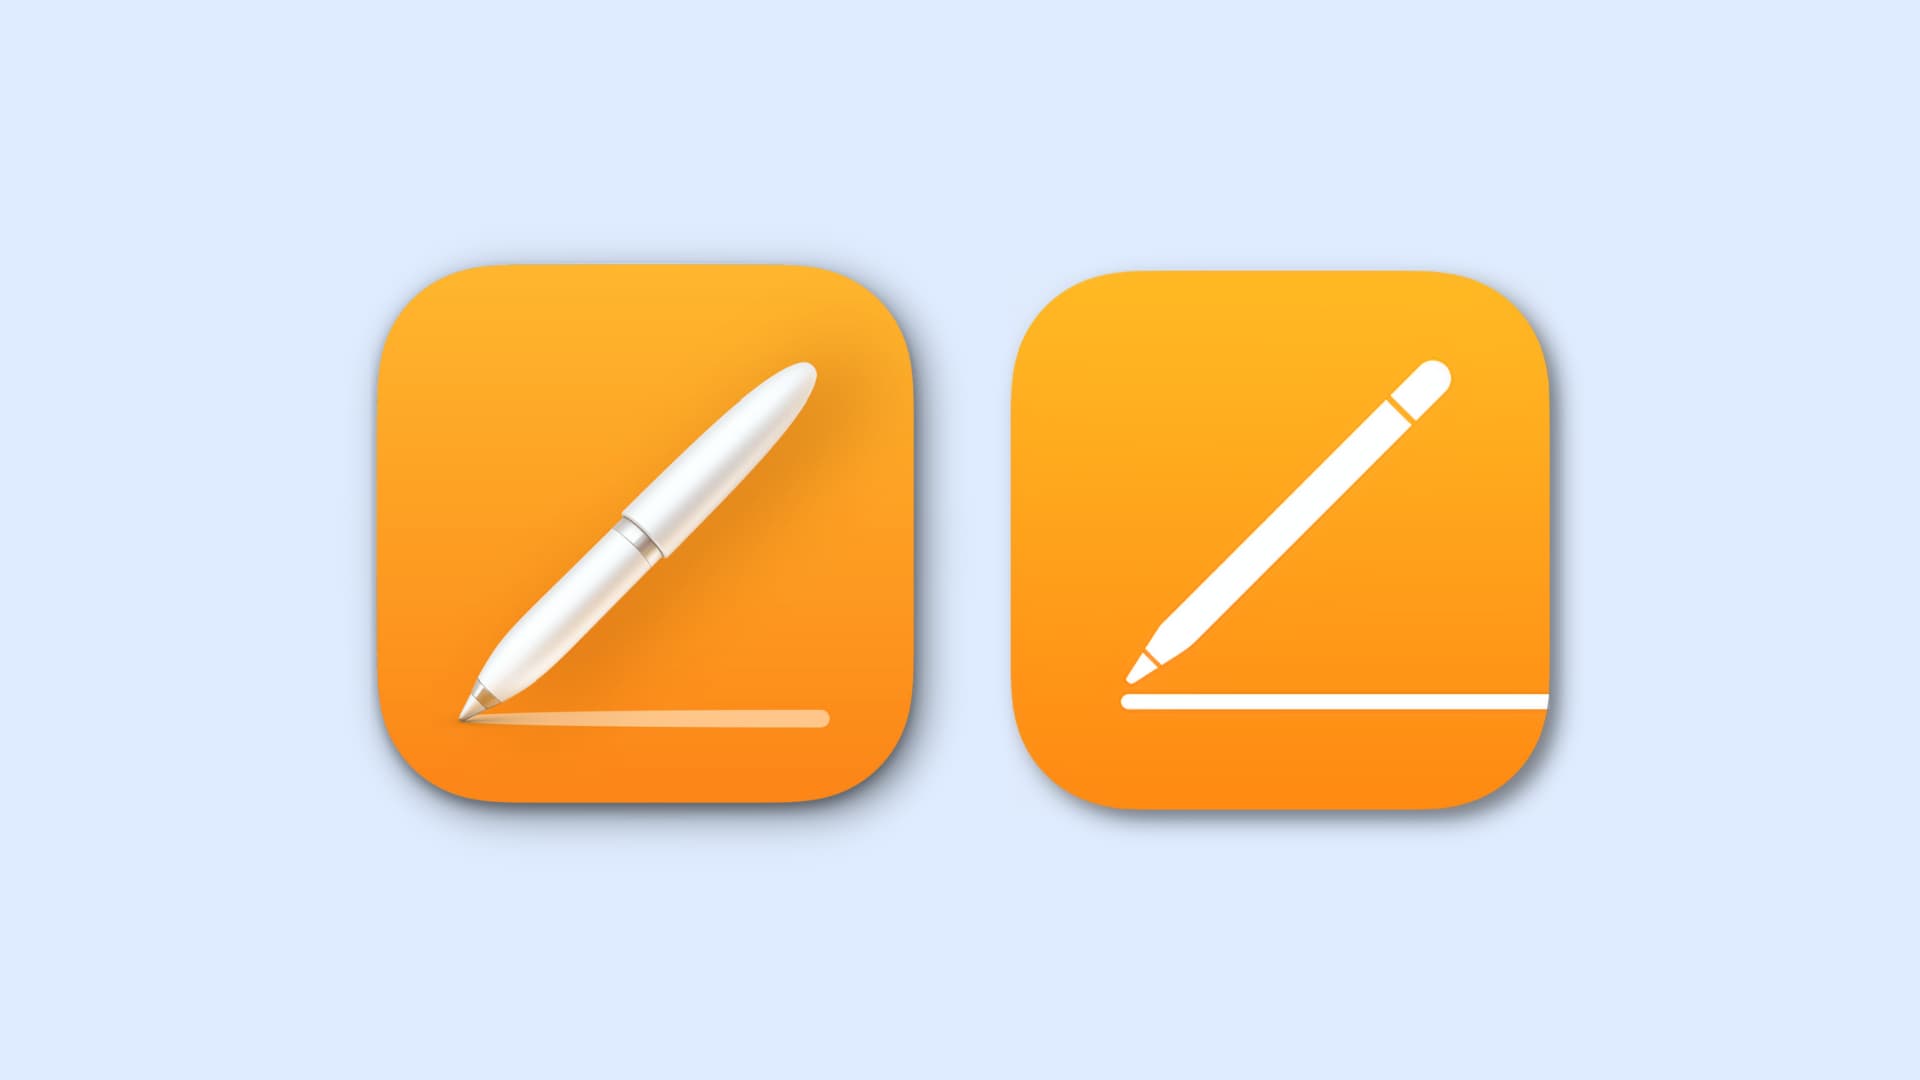 Apple Pages app icon for Mac and iOS